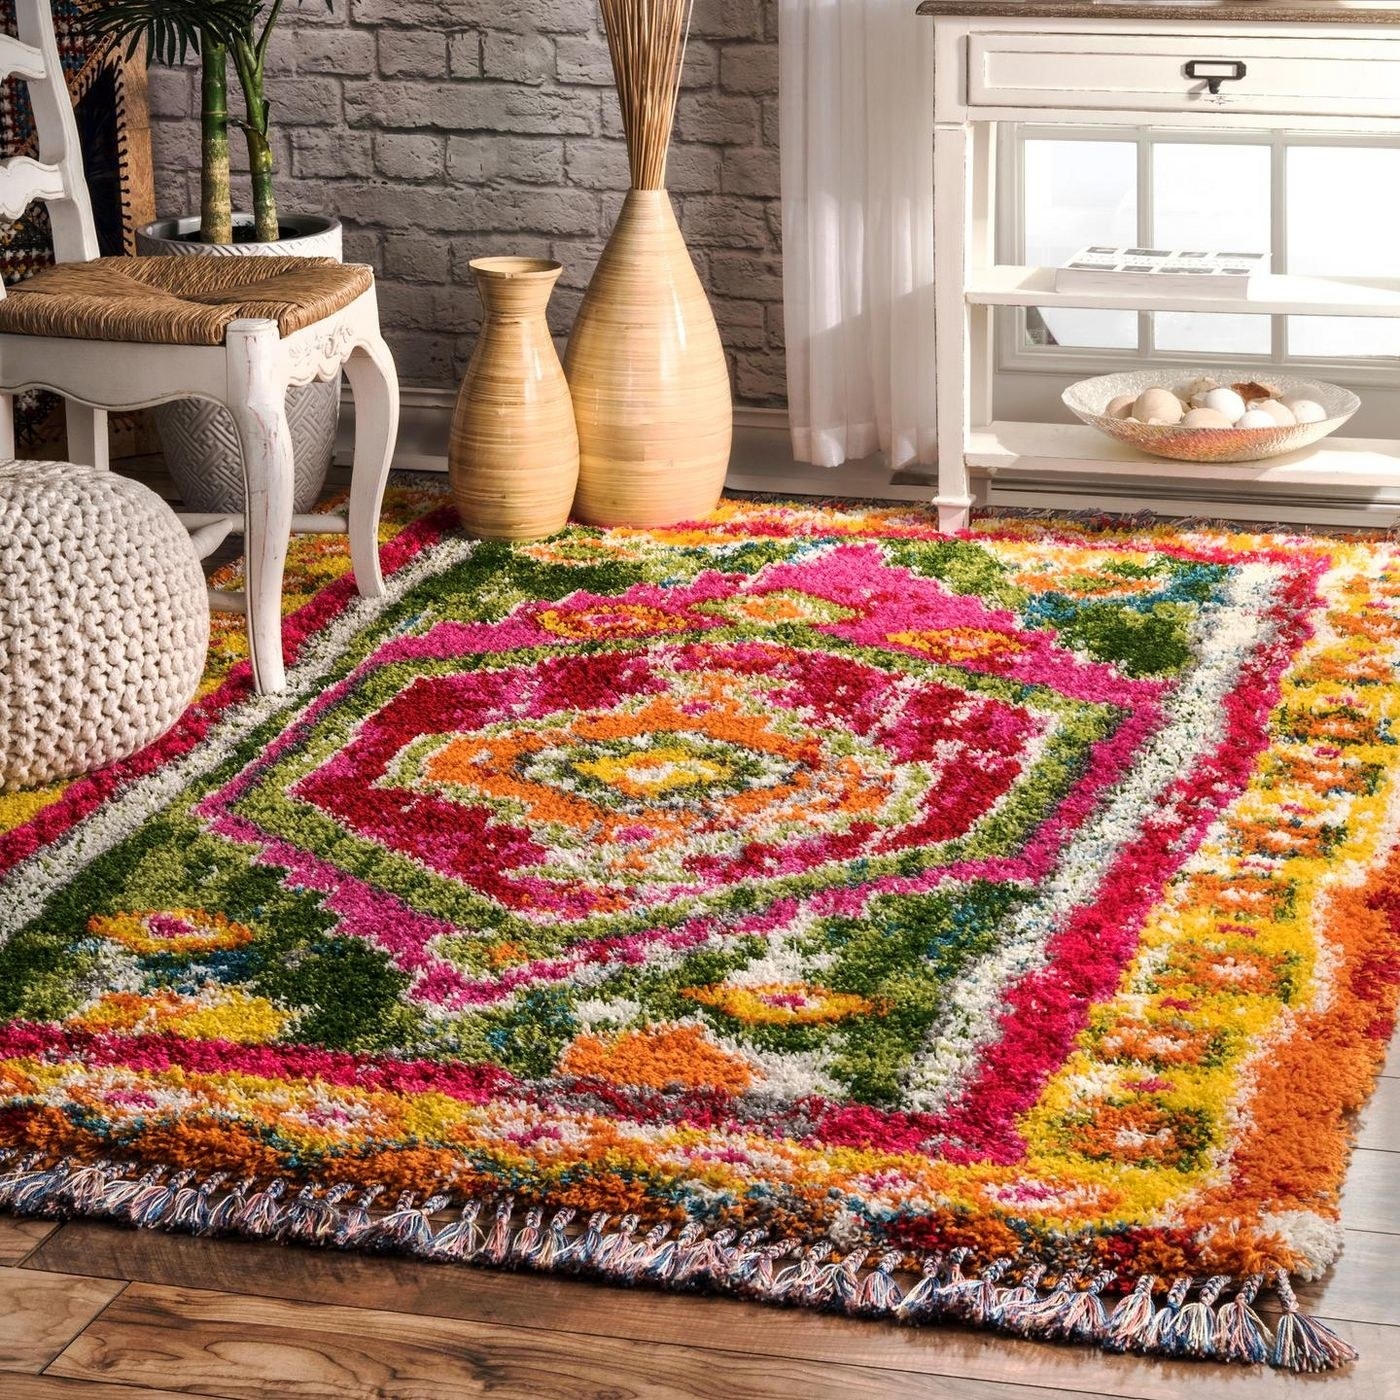 the fuzzy patterned shag rug in warm colors